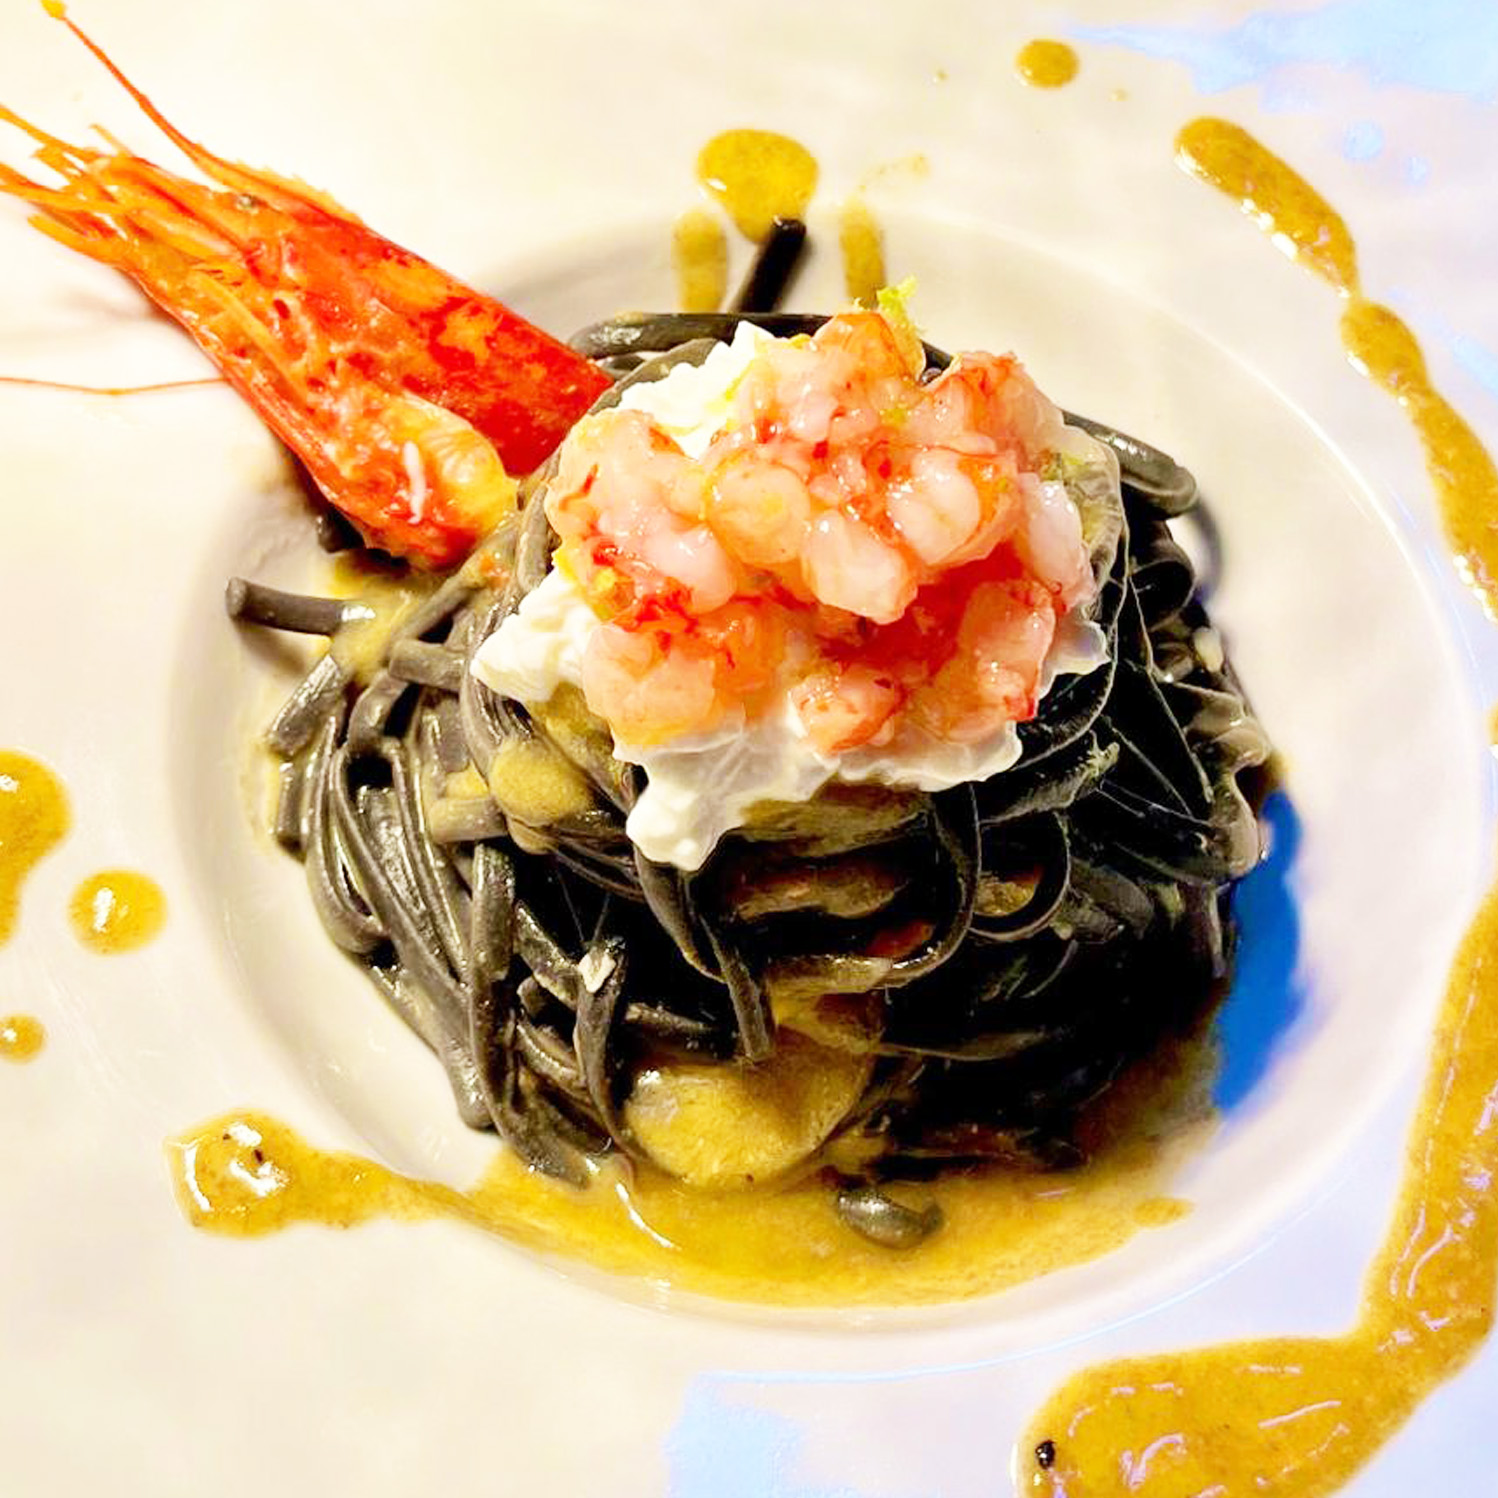 Linguine with cuttlefish ink, stracciata of burrata, red prawn tartare flavored with lime